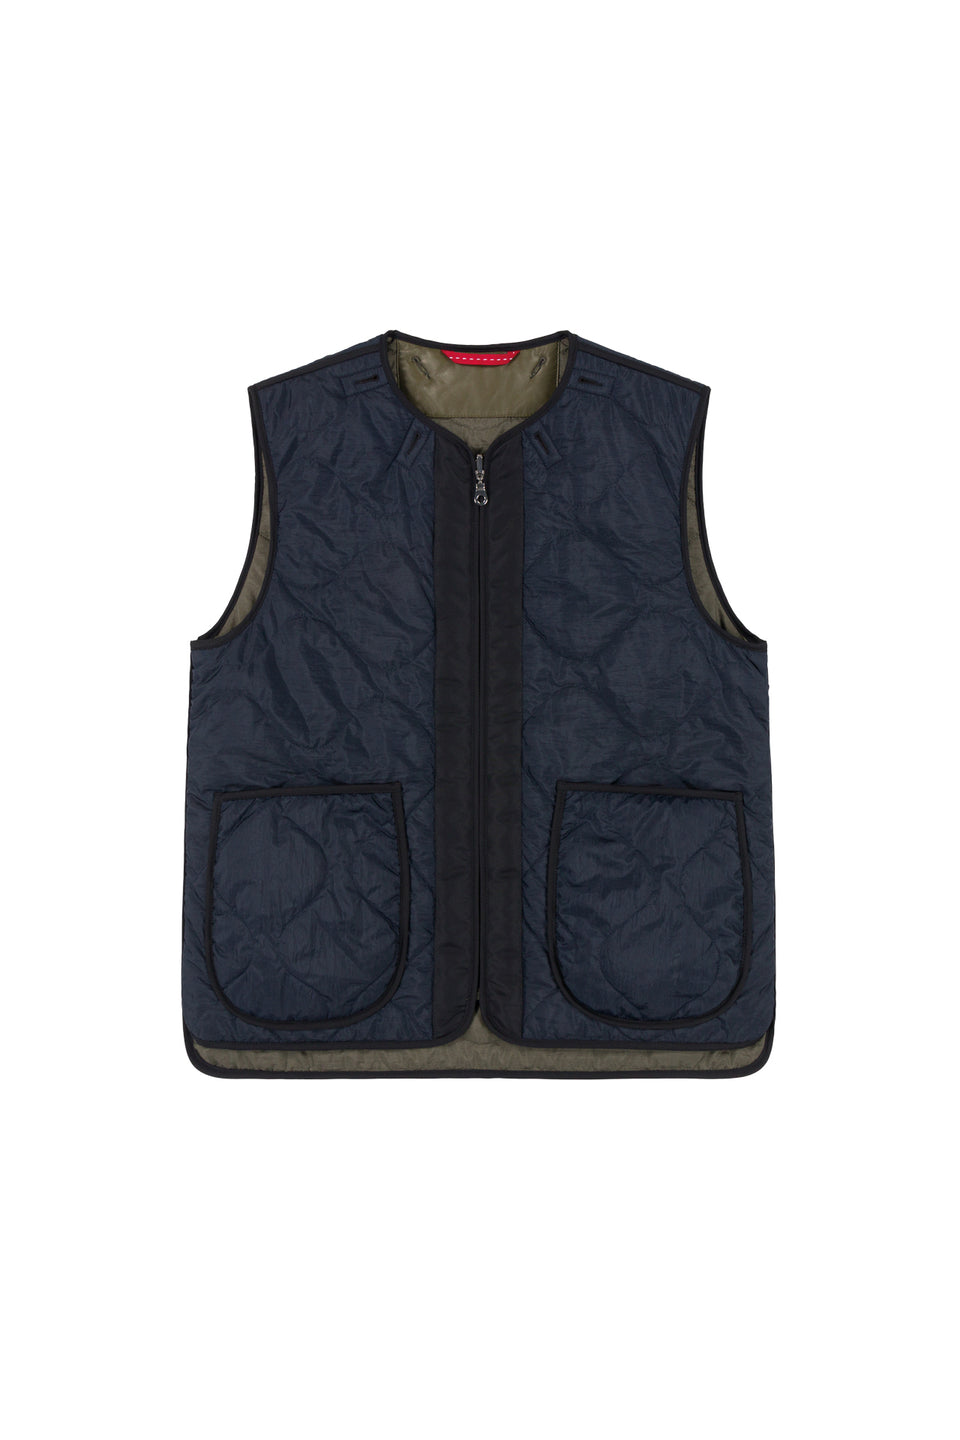 Marfa Stance x Airmail Shareable vest - Navy / Dark Olive (listing page thumbnail)